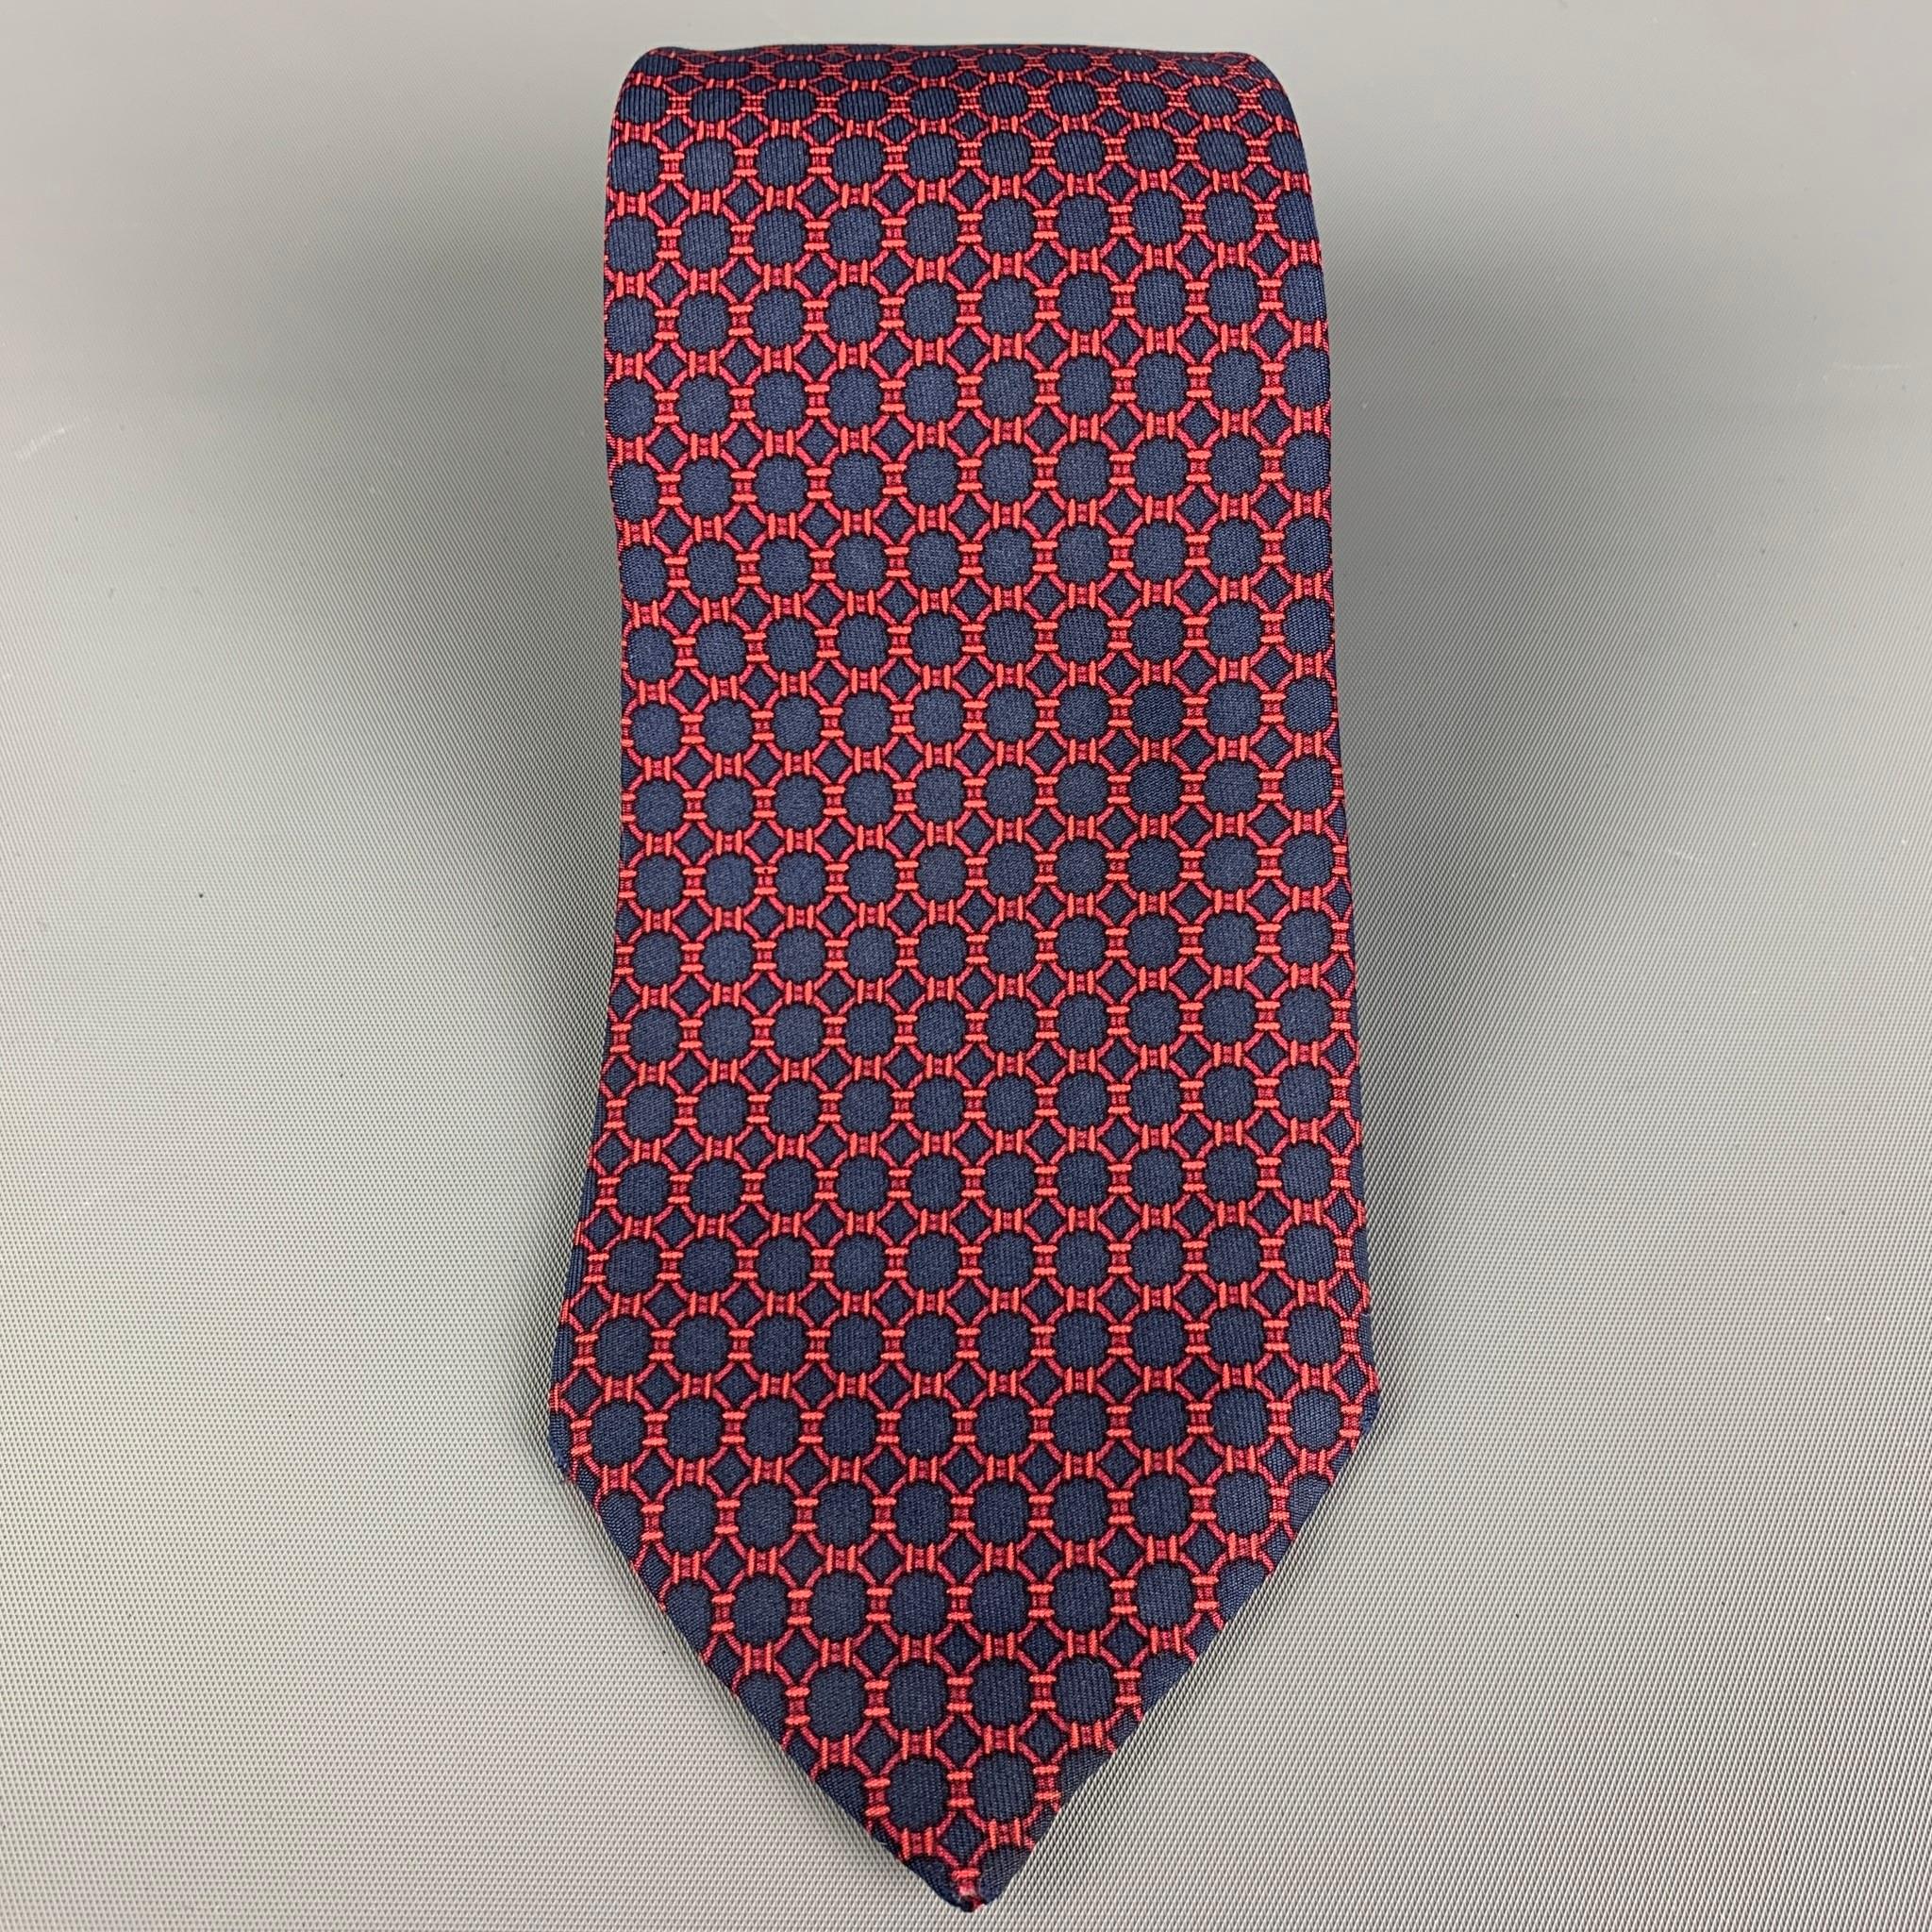 HERMES necktie comes in a navy & red silk with a all over dot print. Made in France.

Very Good Pre-Owned Condition.
Marked: 903 HA

Width: 3 in. 

 